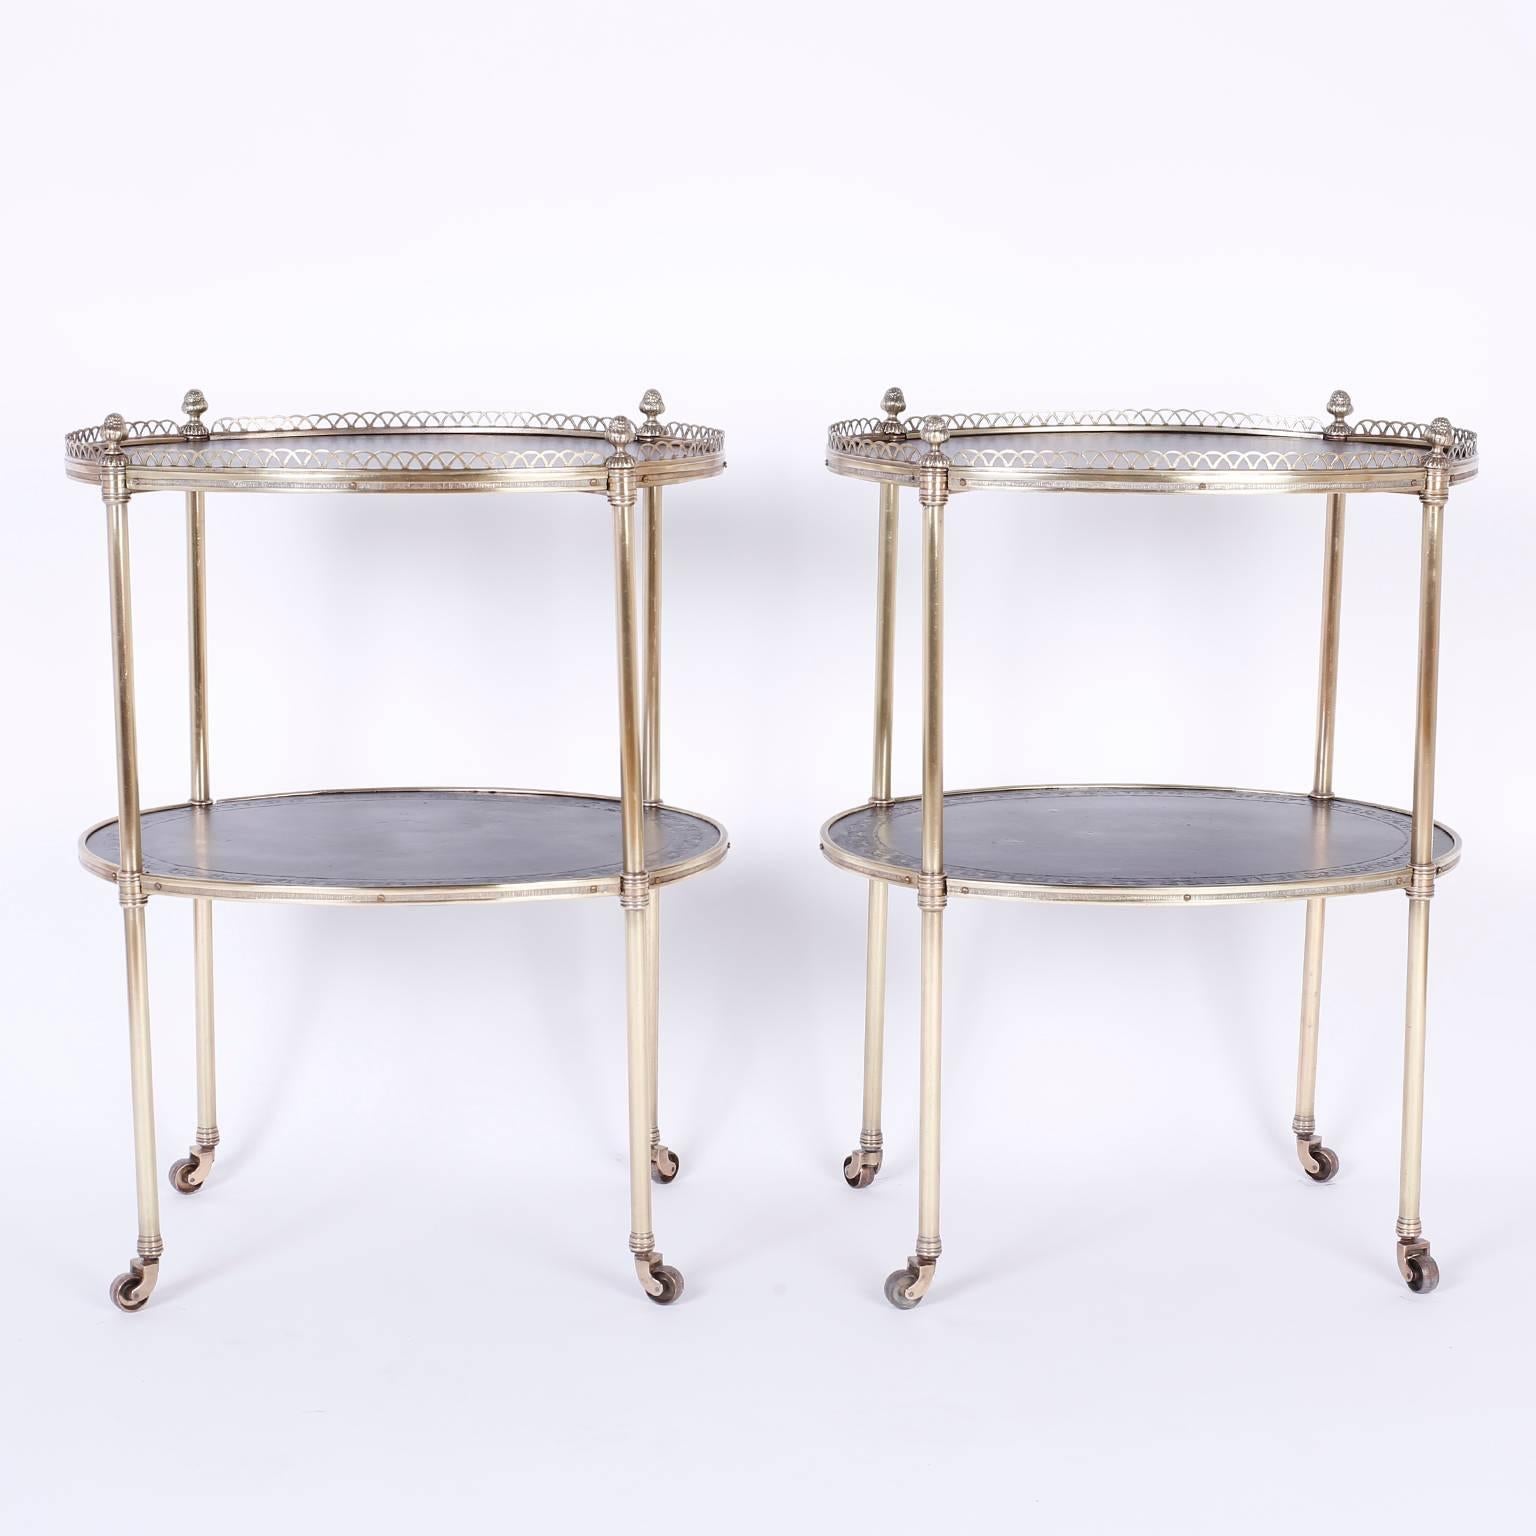 Chic pair of midcentury brass and black leather serving carts that can function as end tables or bedside stands. The top tier features a brass gallery punctuated by four acorn finials. Both plateaus have tooled leather eagles and plumbs around the